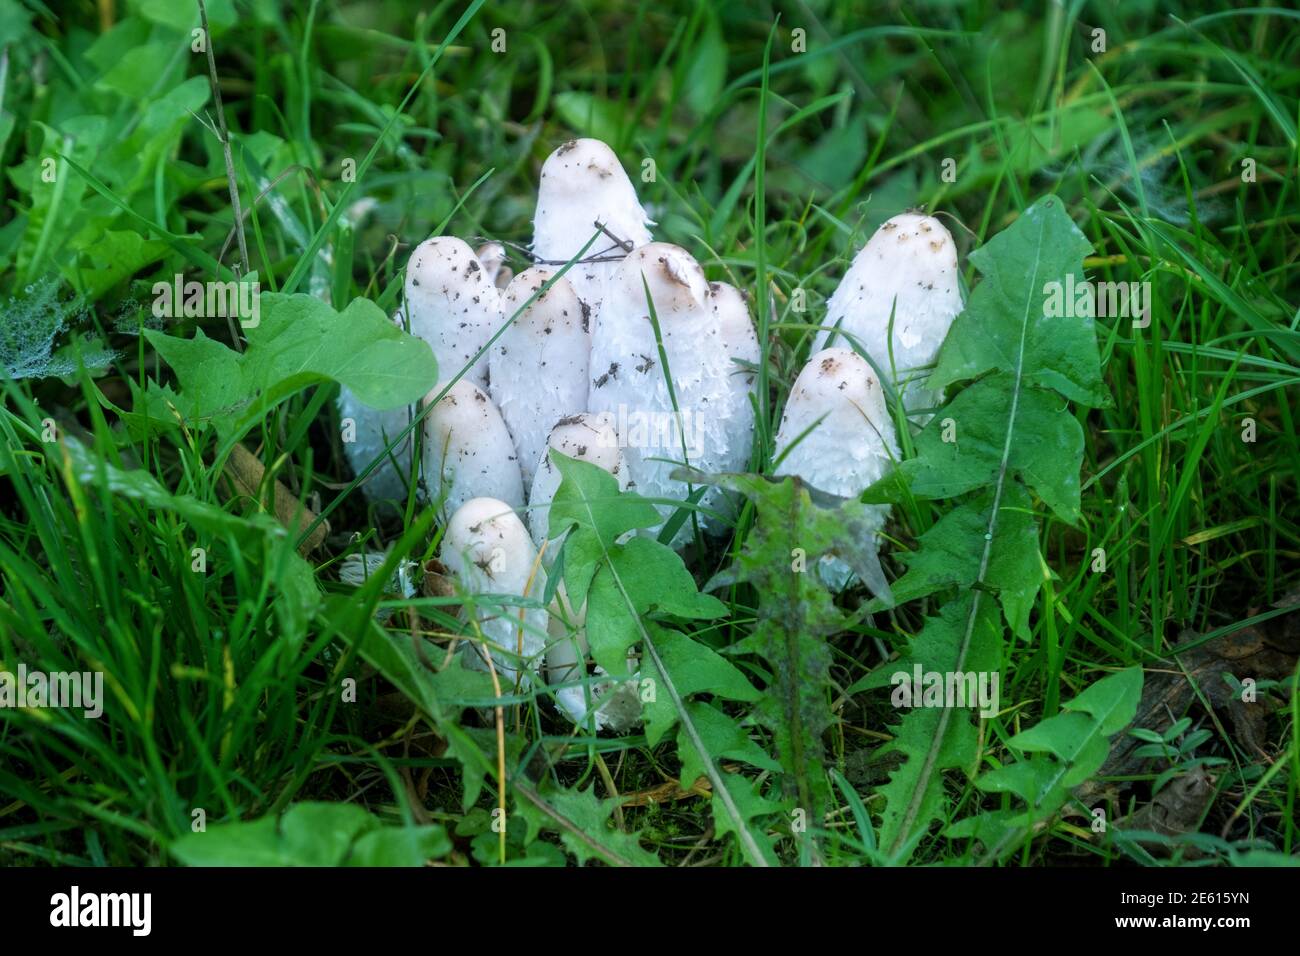 Group of shaggy ink cap mushrooms in the grass Coprinus comatus, Shaggy Mane, Shaggy Inkcap, Lawyer’s Wig, Coprin chevelu, Schopftintling, Agarico chi Stock Photo